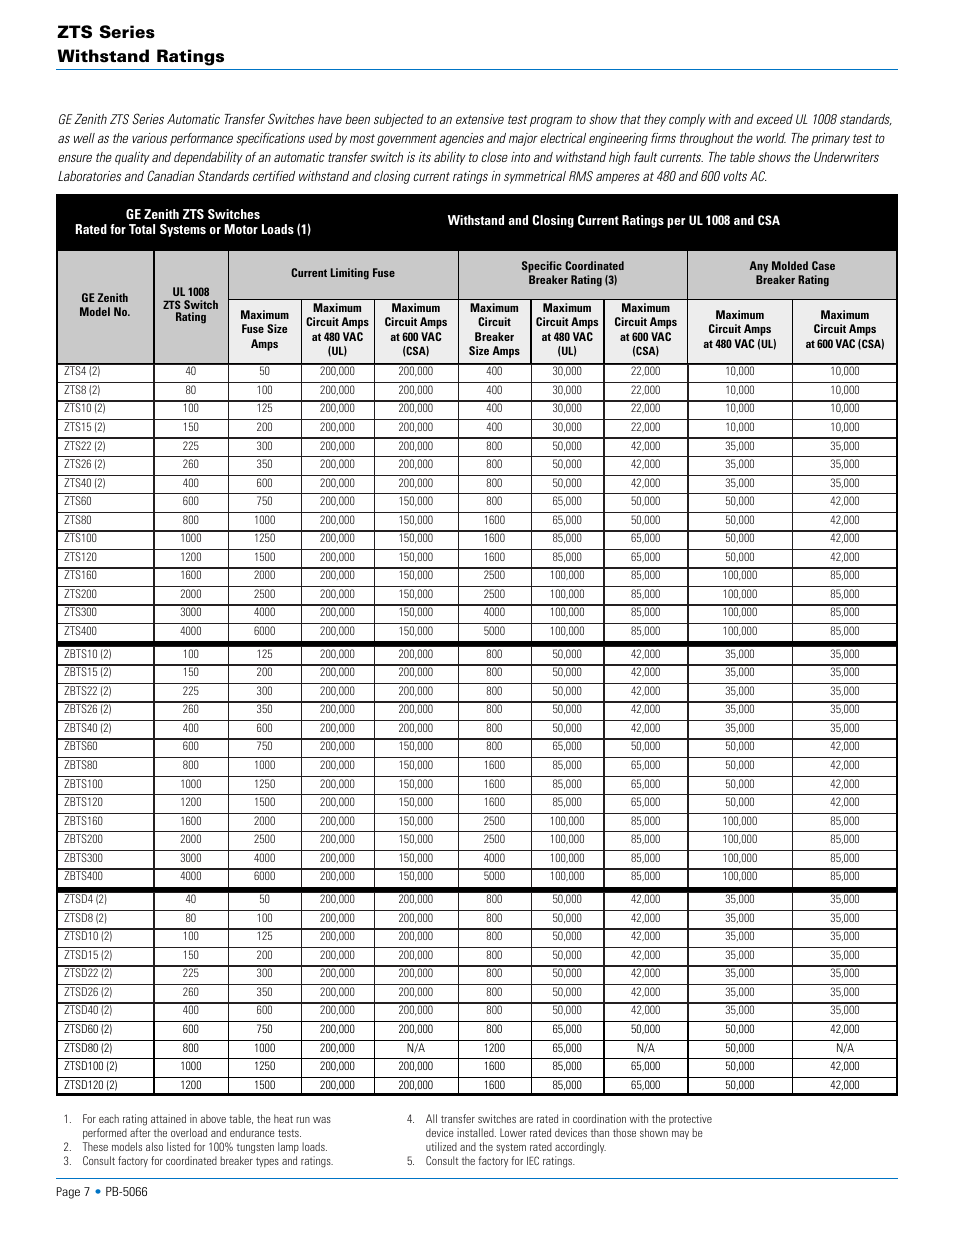 Zts series withstand ratings | GE Zenith ZTS Series User Manual | Page 7 / 10